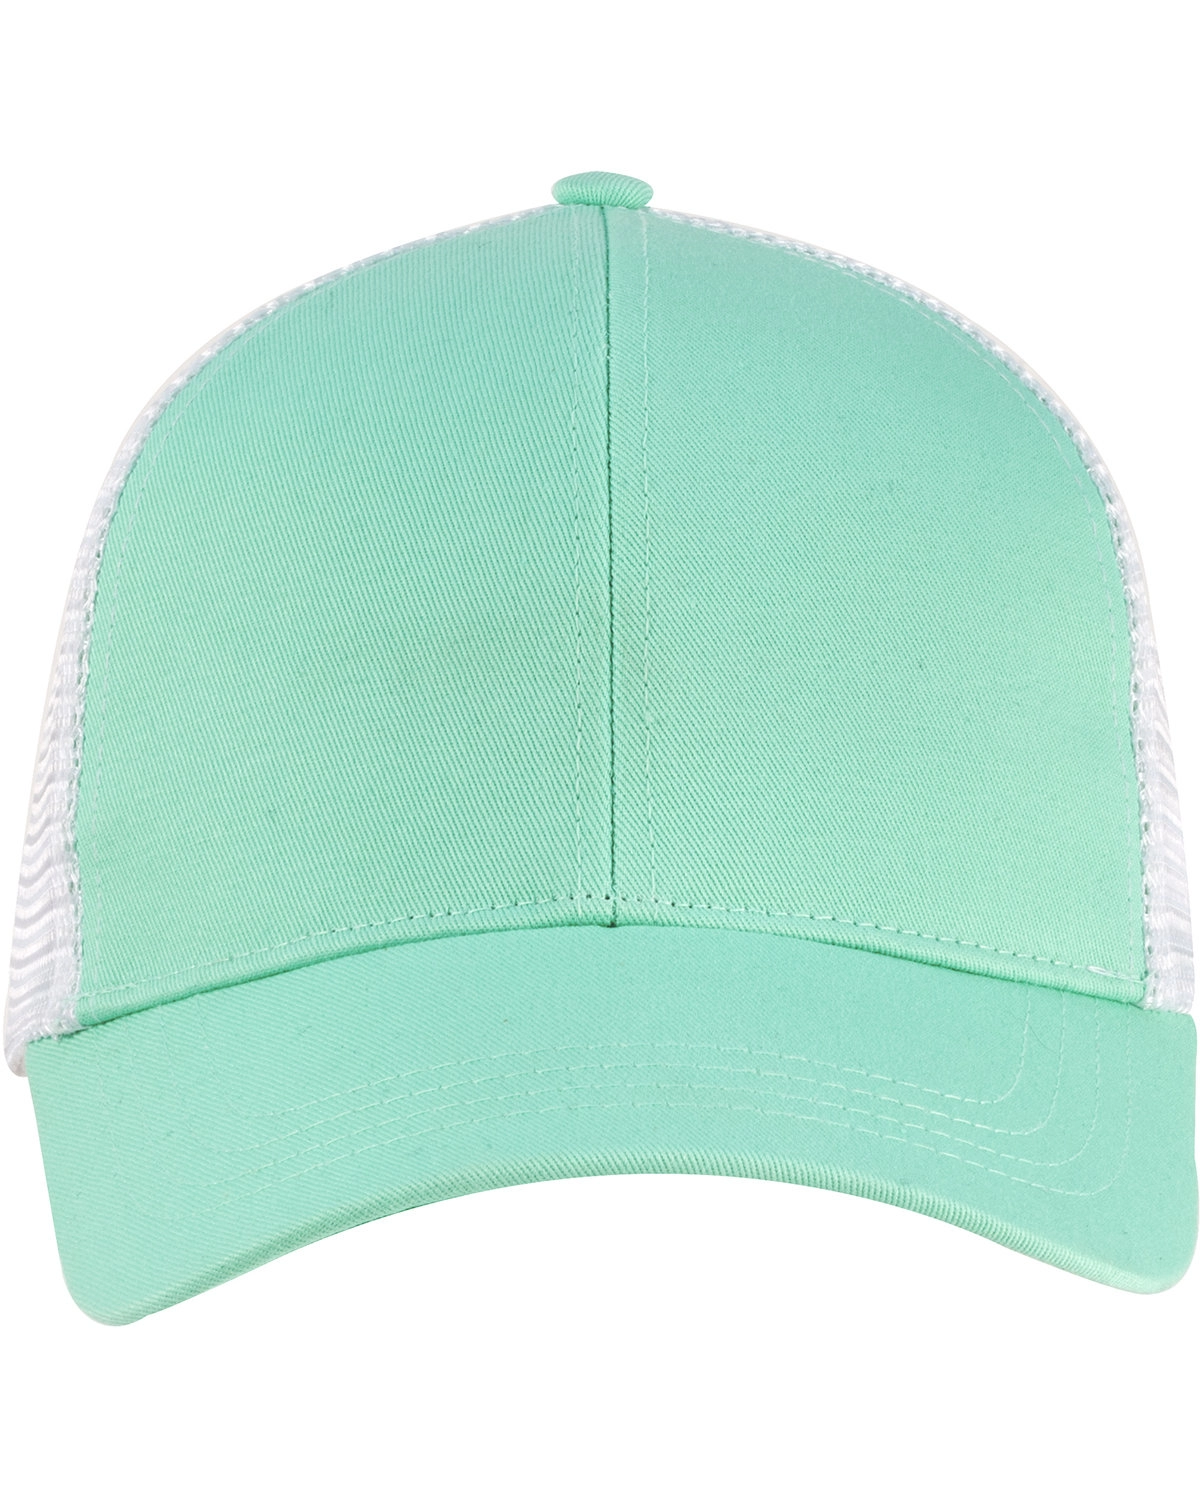 EC7070 econscious Eco Trucker - From Organic/Recycled